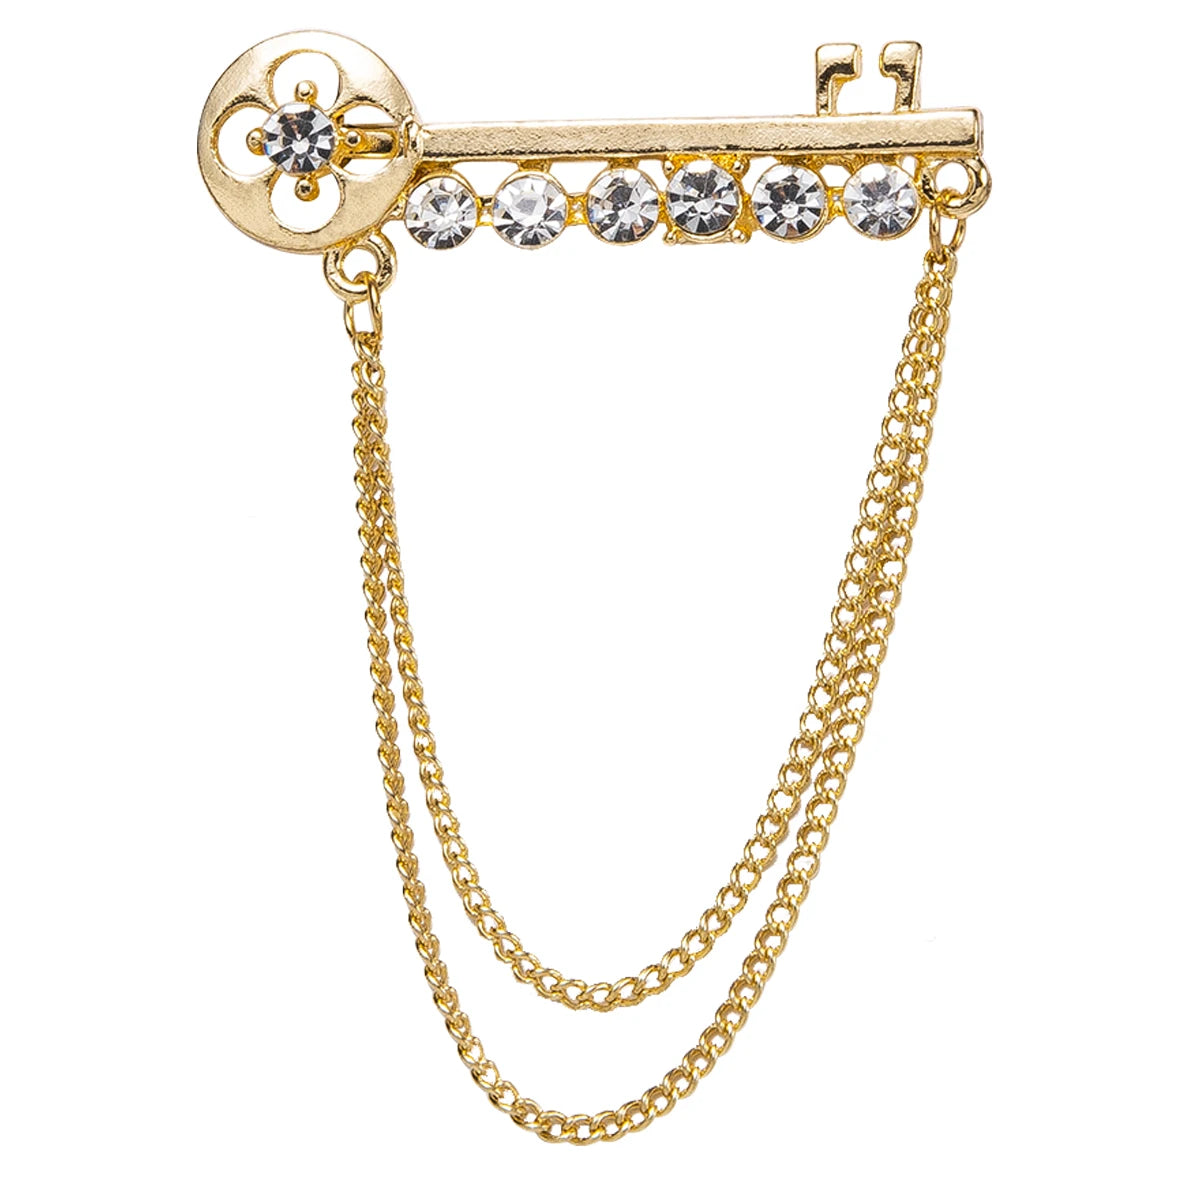 a gold brooch with a key and chain